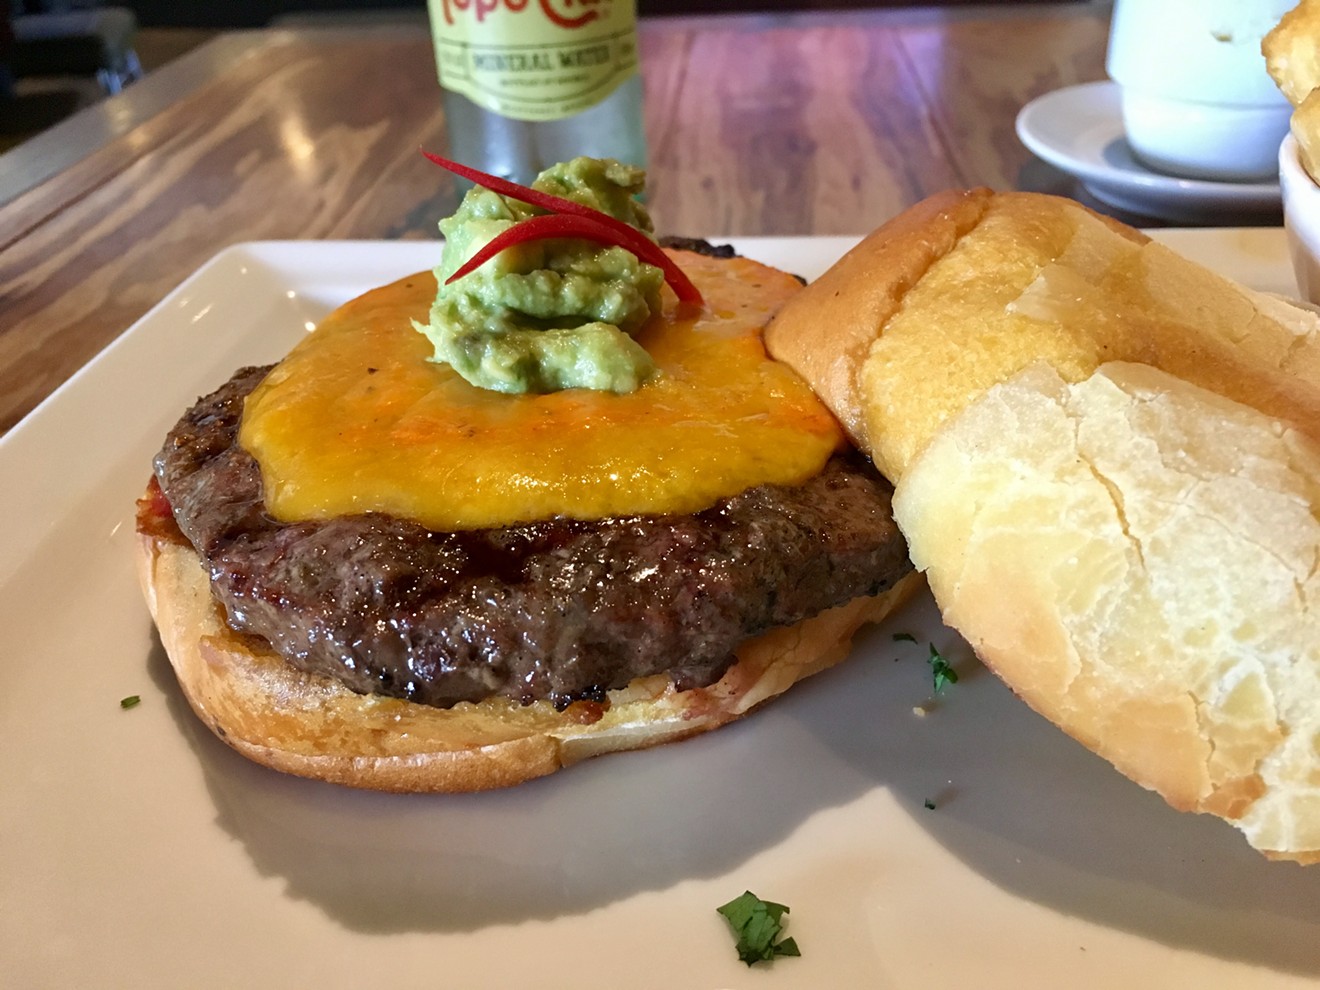 The "Andes Burger" with a scoop of avocado mash and rocoto pepper slivers for $13.50.